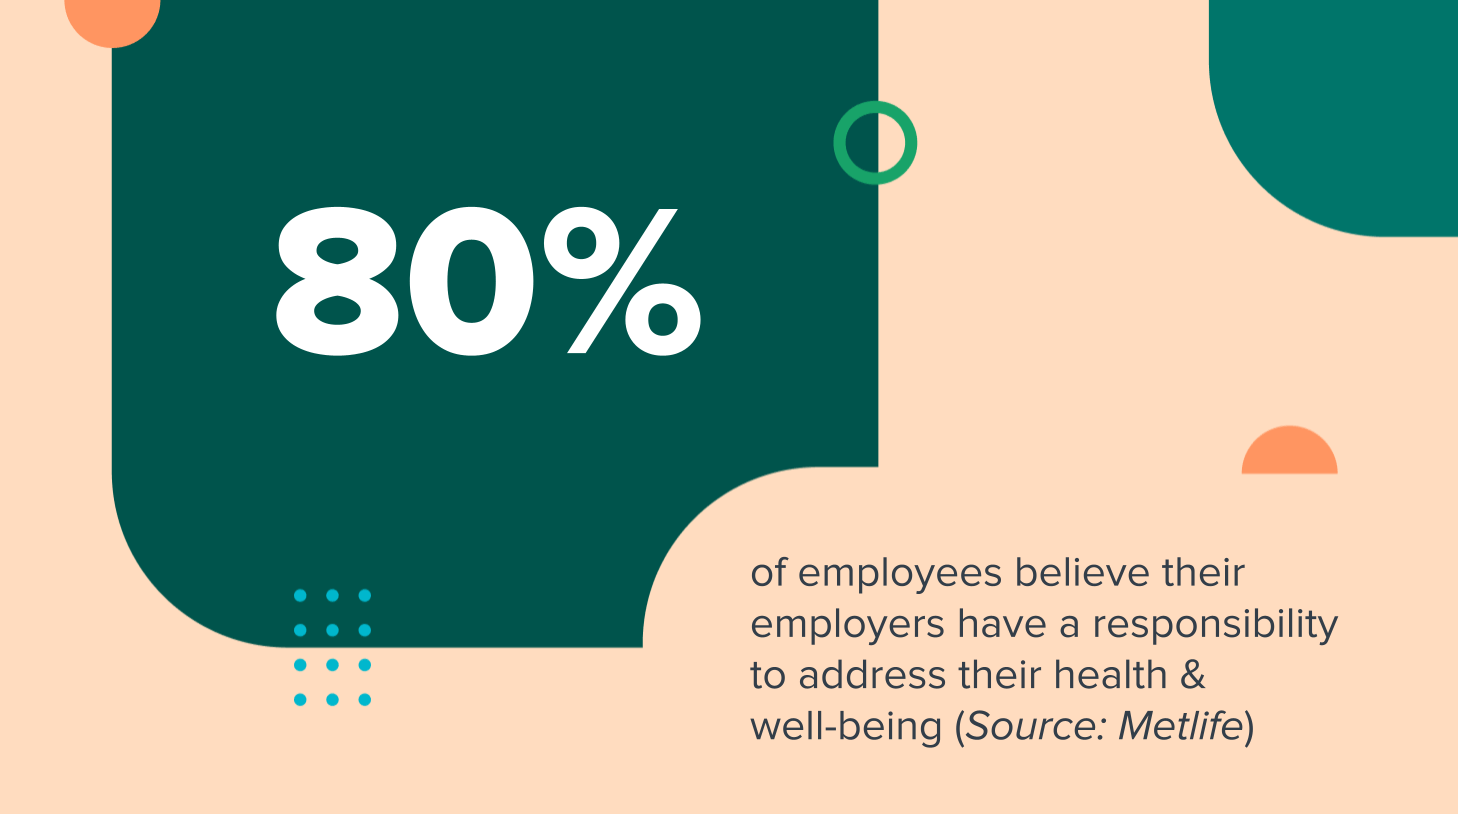 80% of employees believe their employers have a responsibility to address their health & well-being (Source: Metlife)